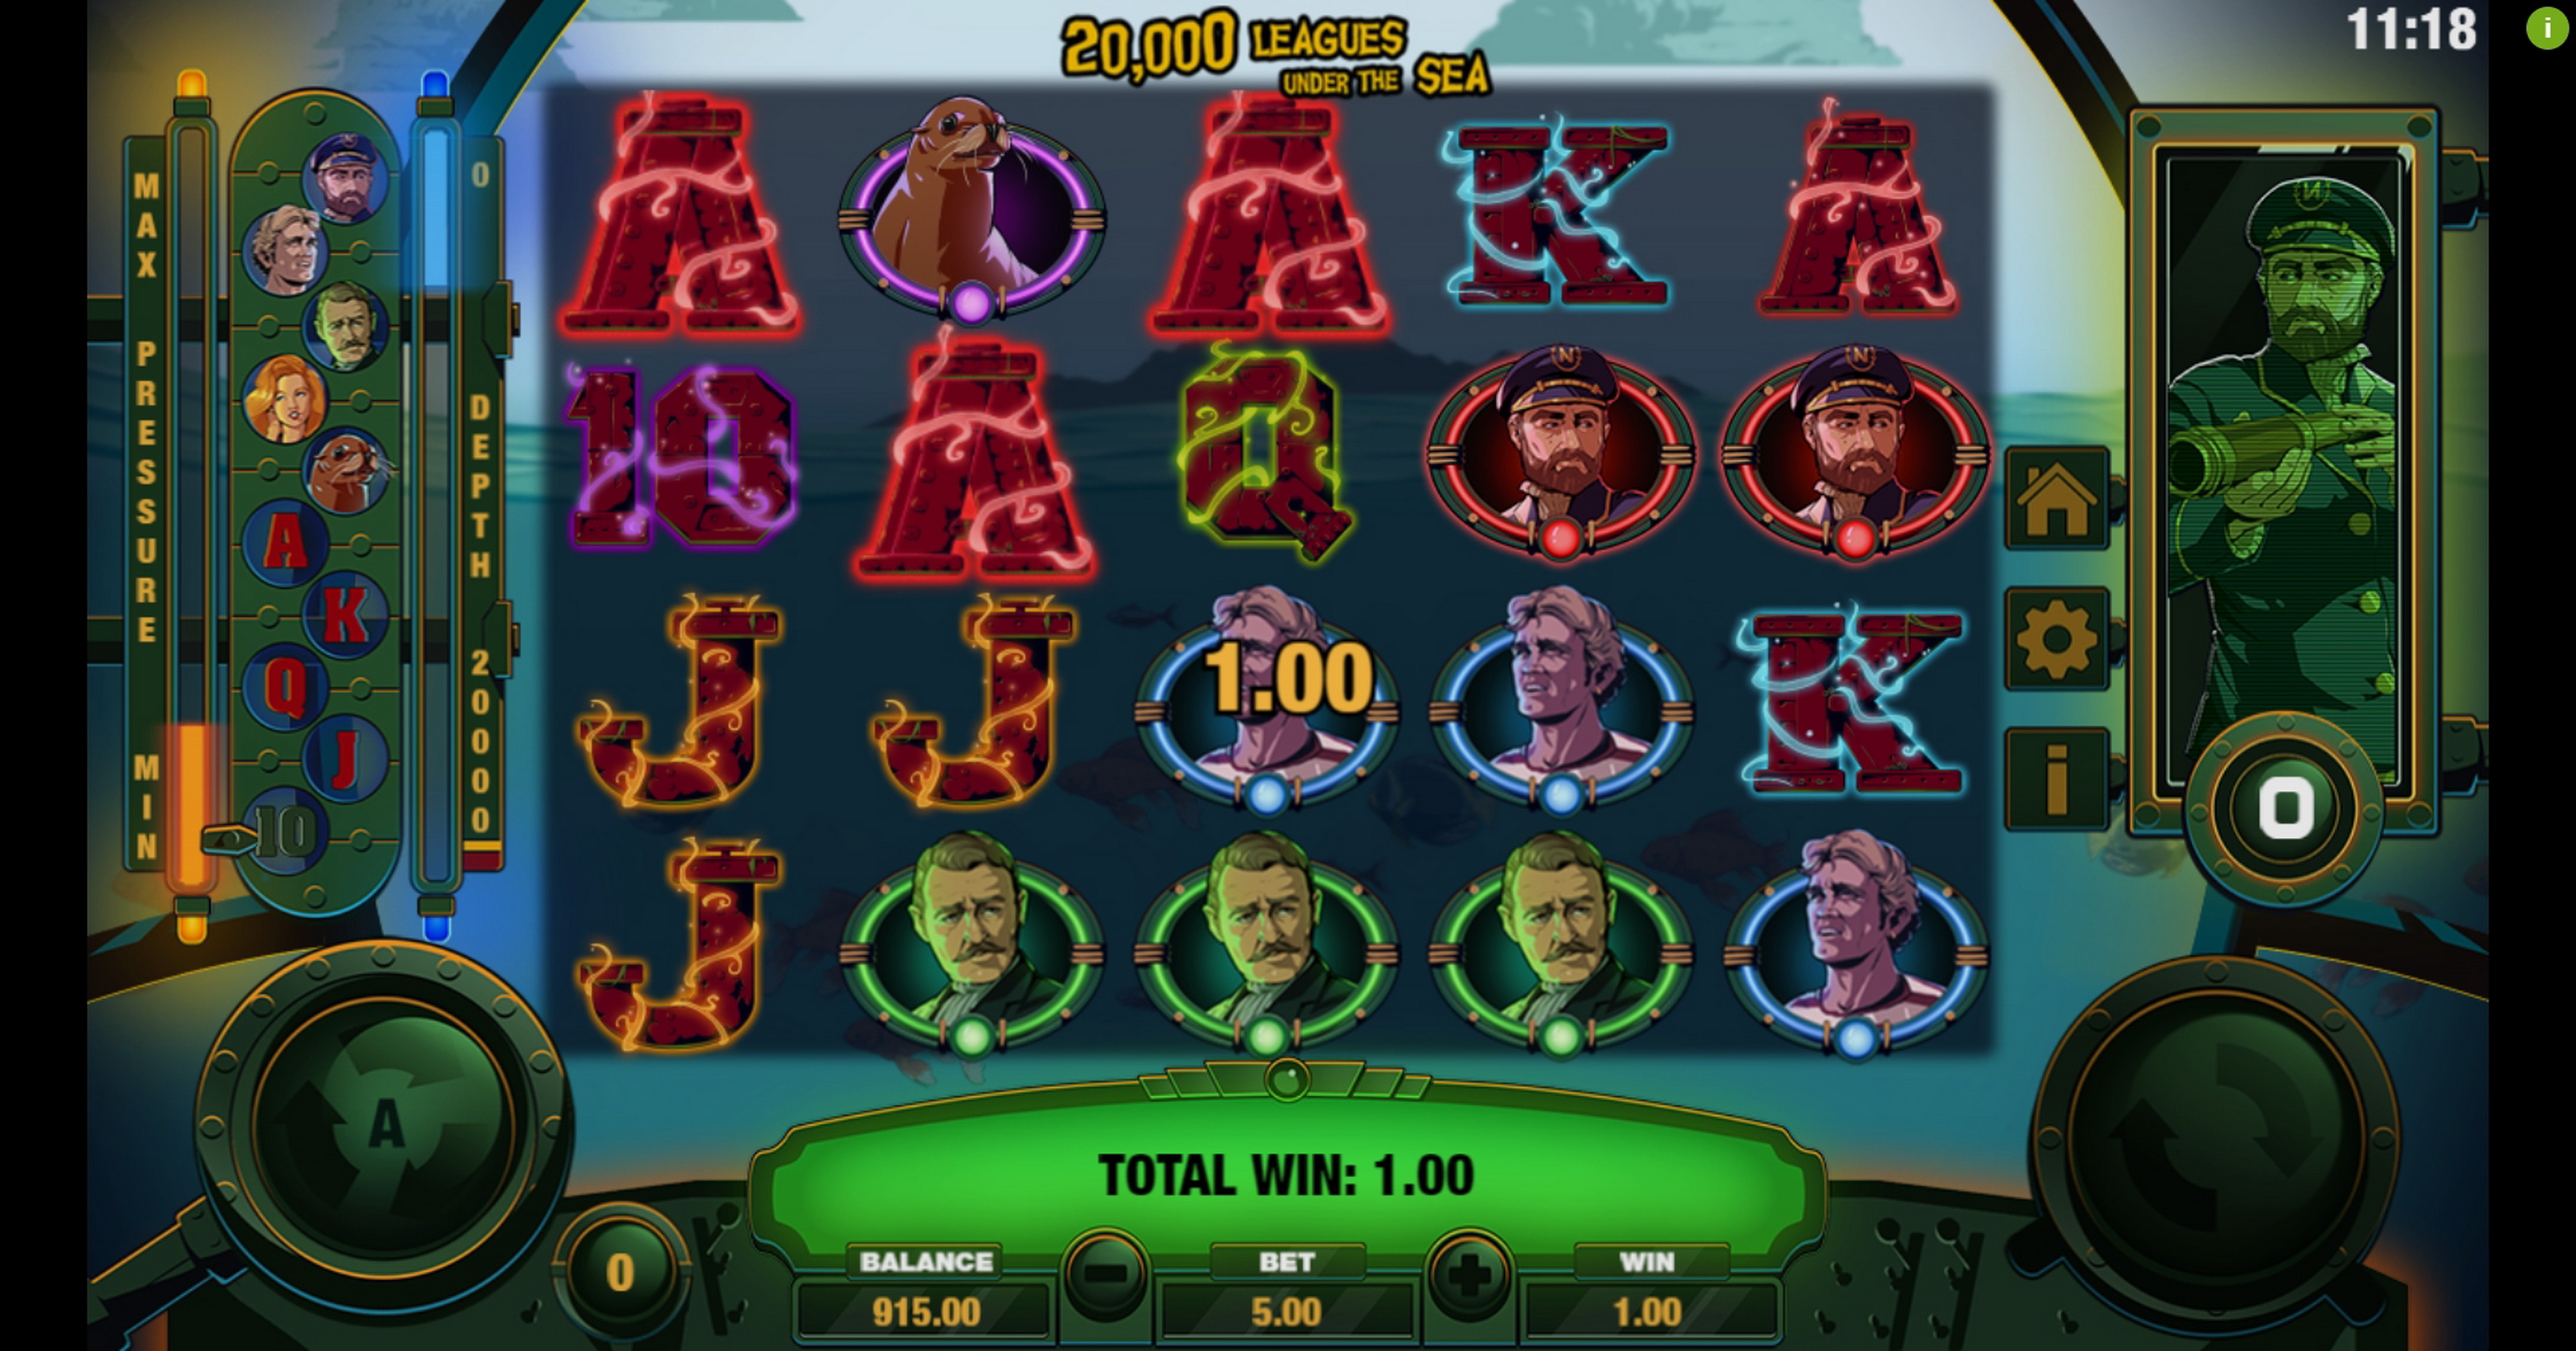 Win Money in 20000 Leagues Under The Sea Free Slot Game by Probability Jones